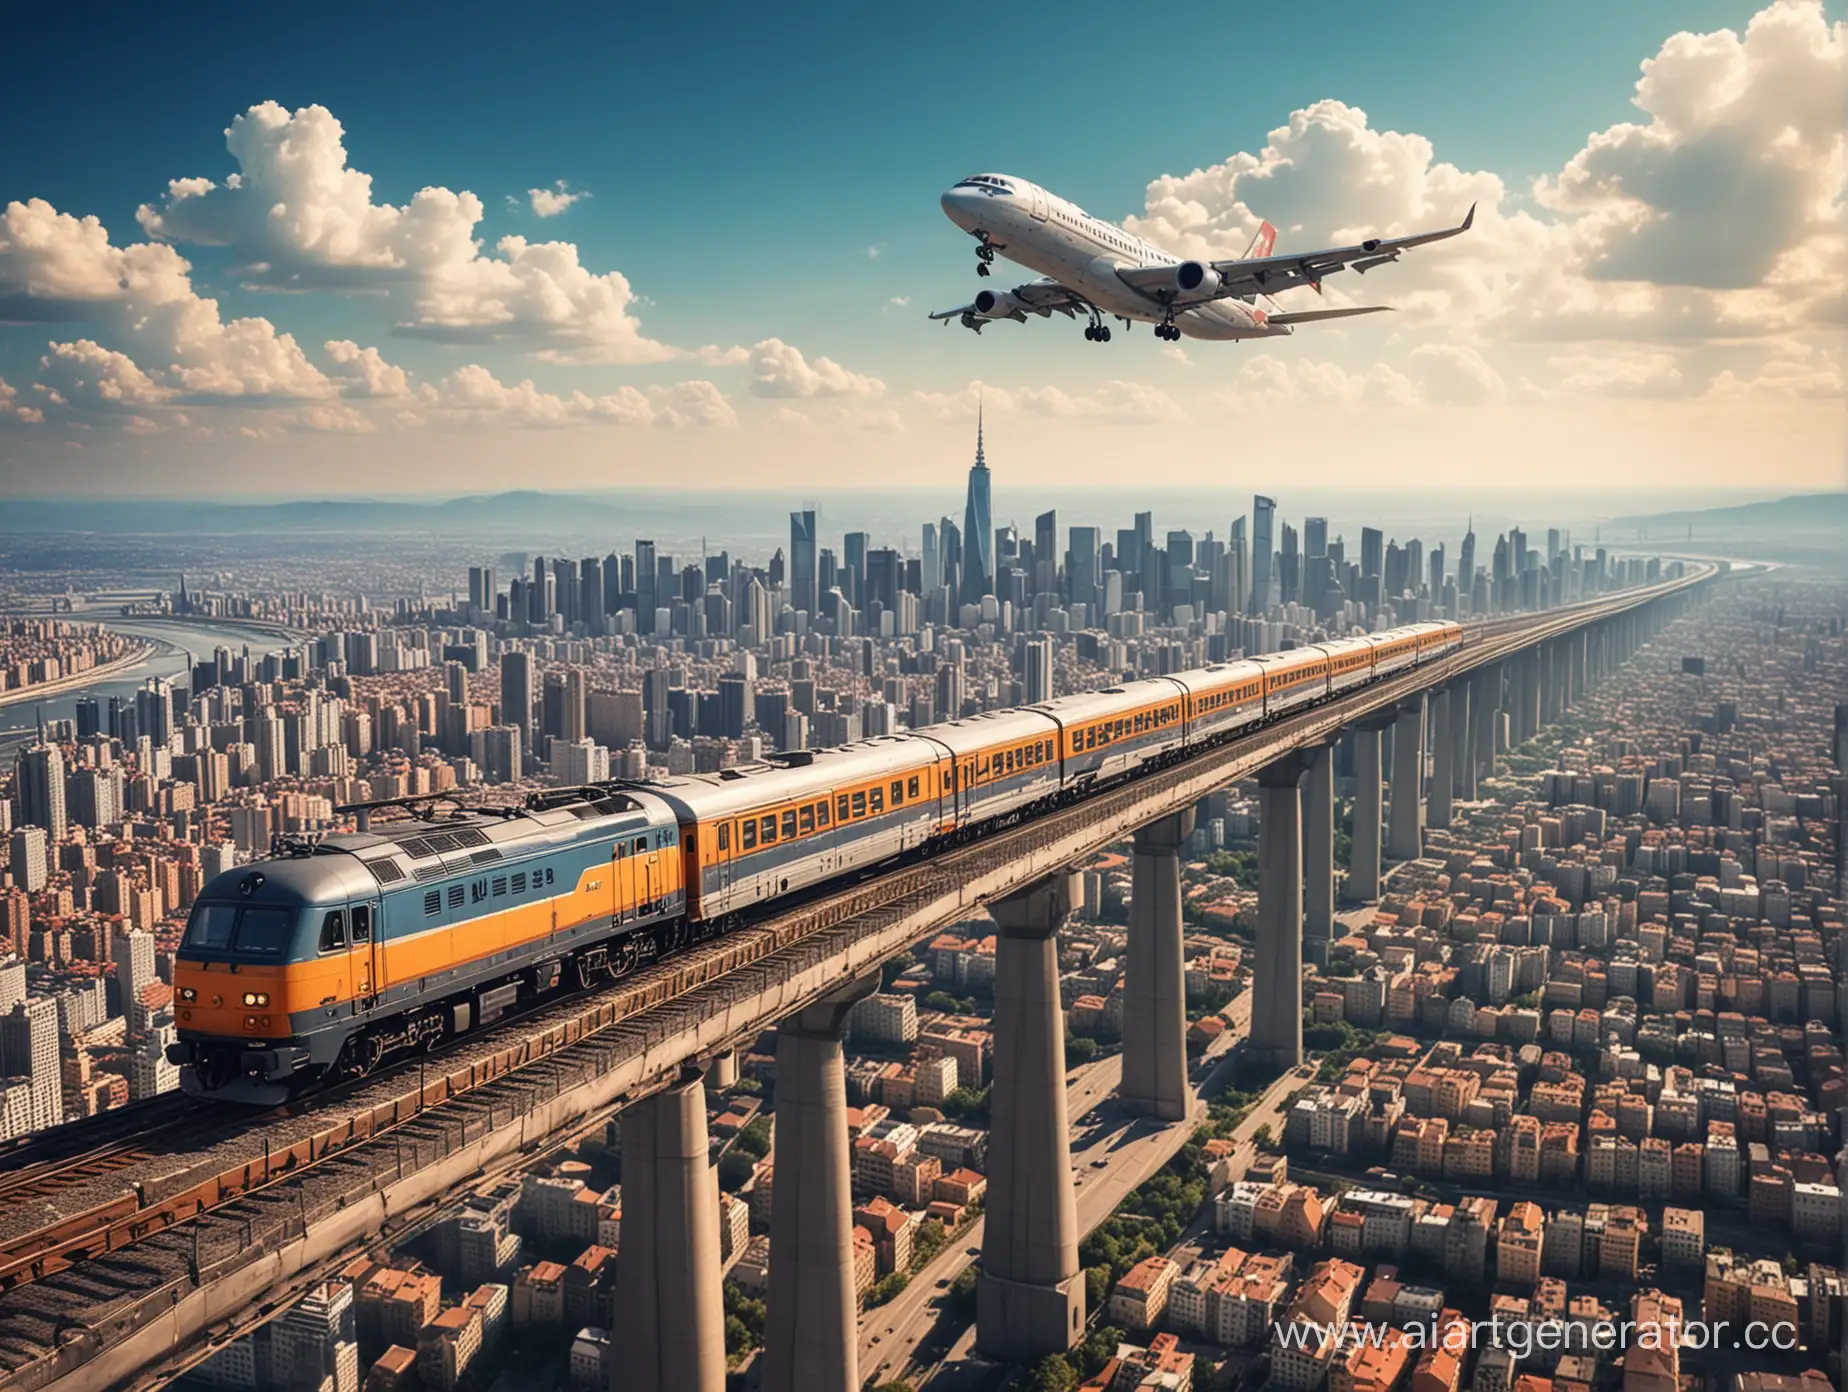 Urban-Skyline-with-Aerial-View-of-Airplane-and-Commuter-Train